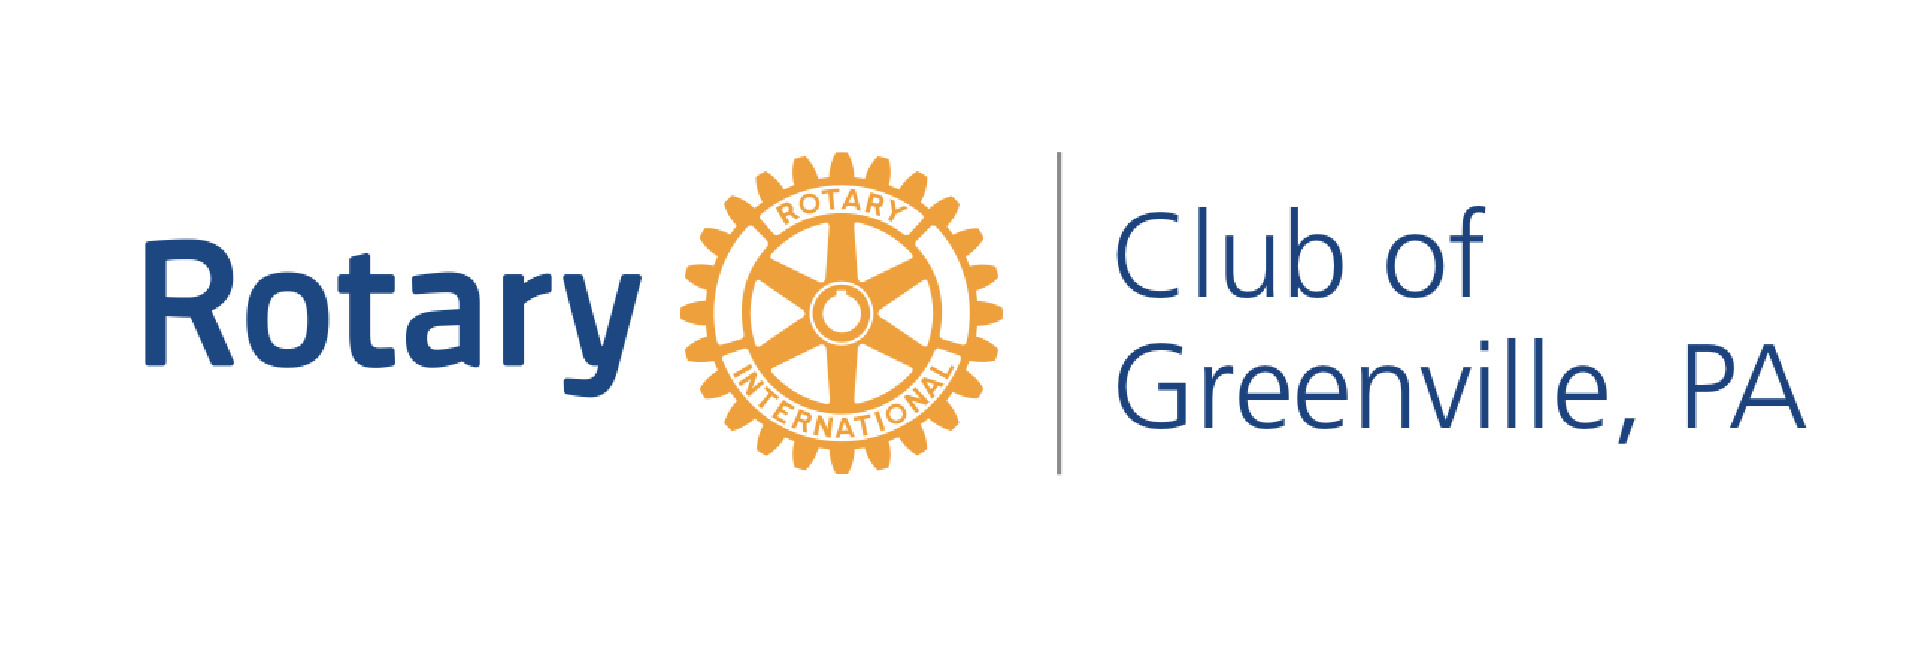 Rotary Club of Greenville, PA